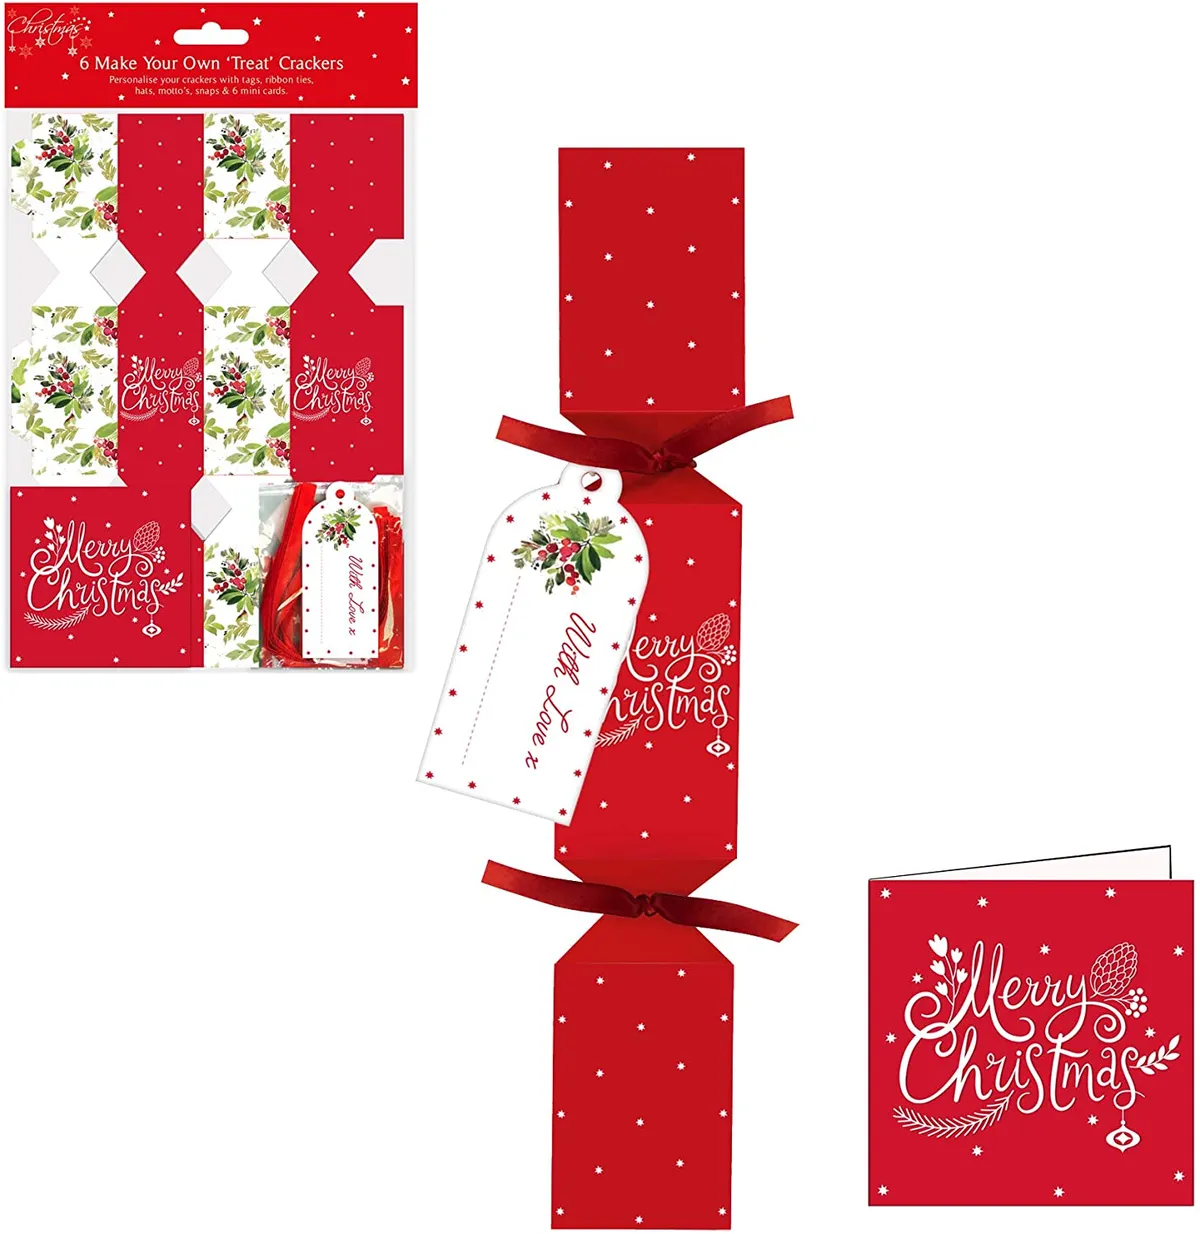 Christmas cracker kit with matching cards